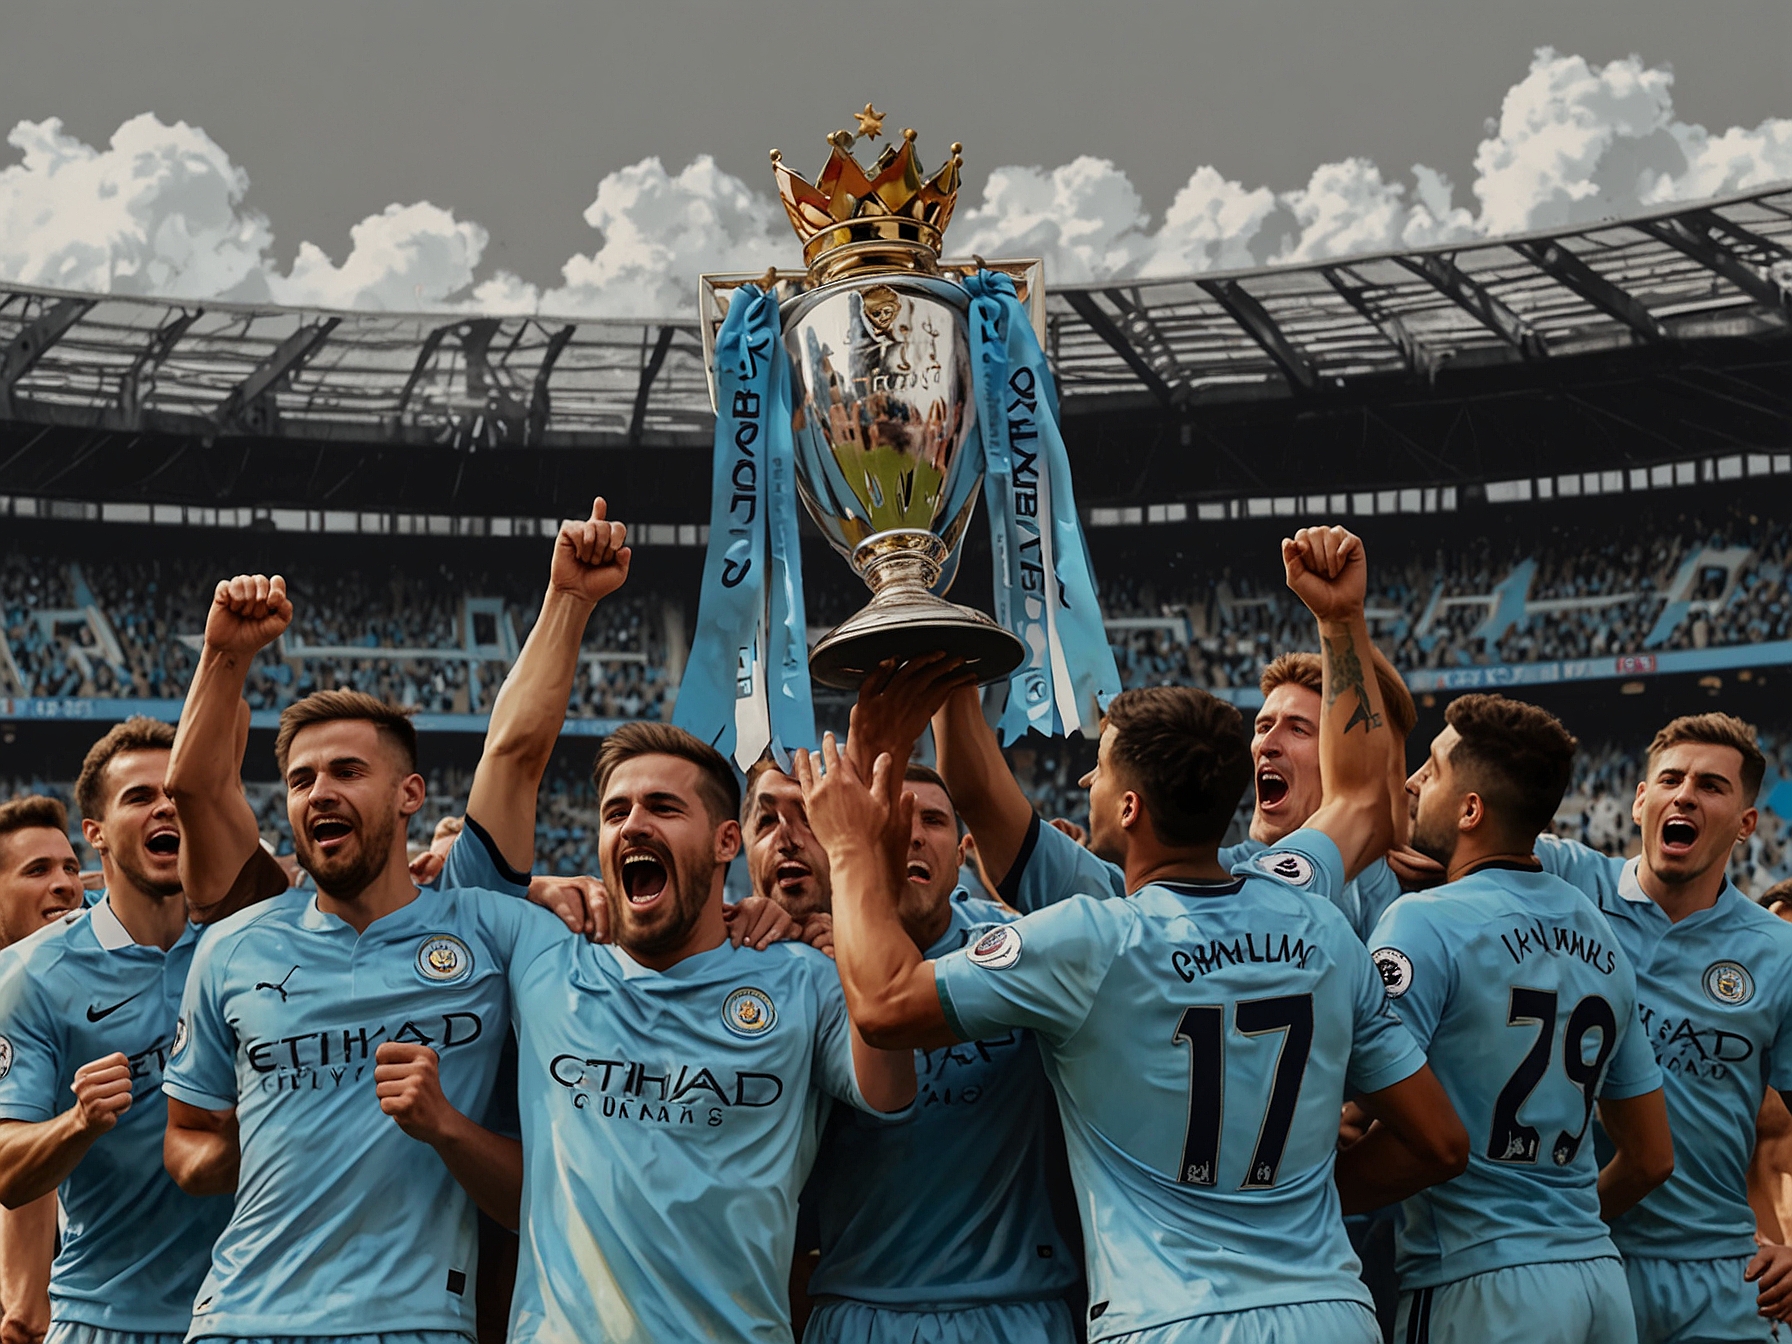 A depiction of Manchester City's triumphs overshadowed by looming allegations of financial misconduct and FFP violations. The club's future successes may be in jeopardy depending on investigation outcomes.